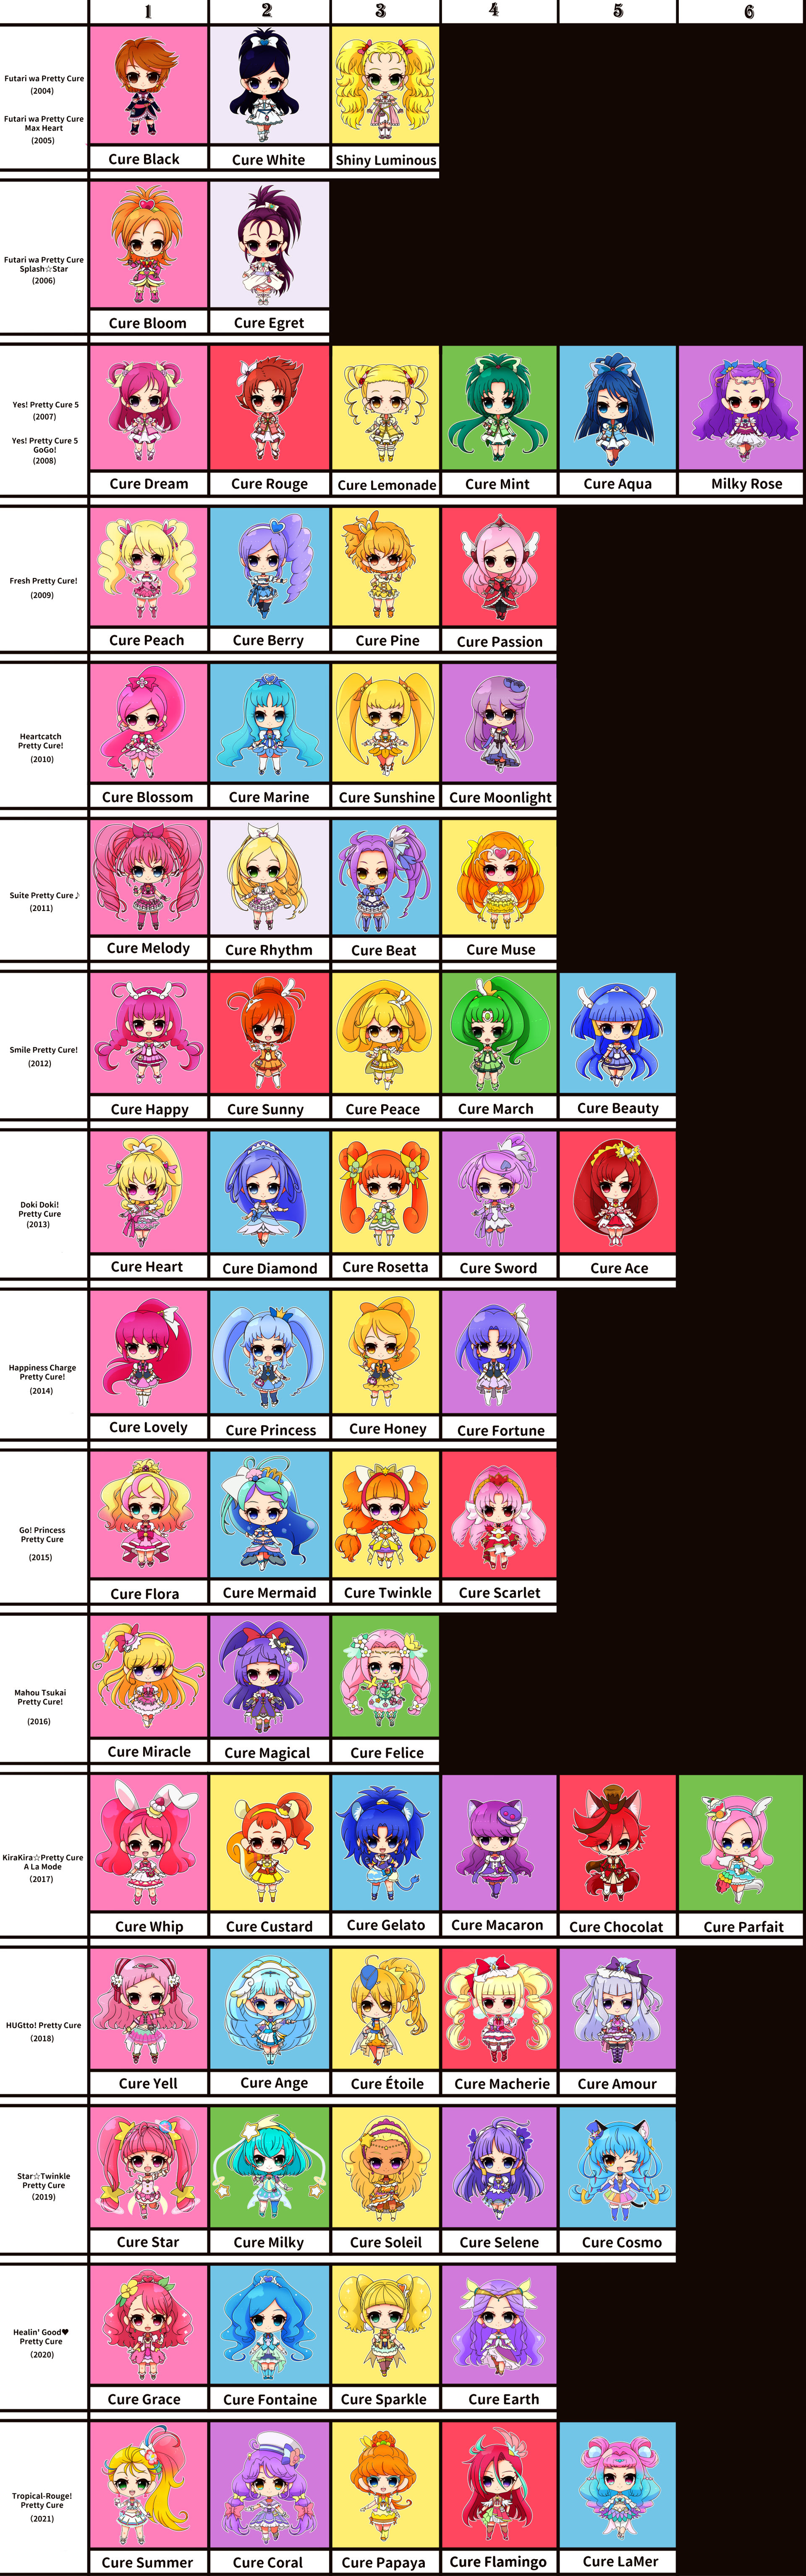 Just found this Animedia character ranking on the Precure Wiki for